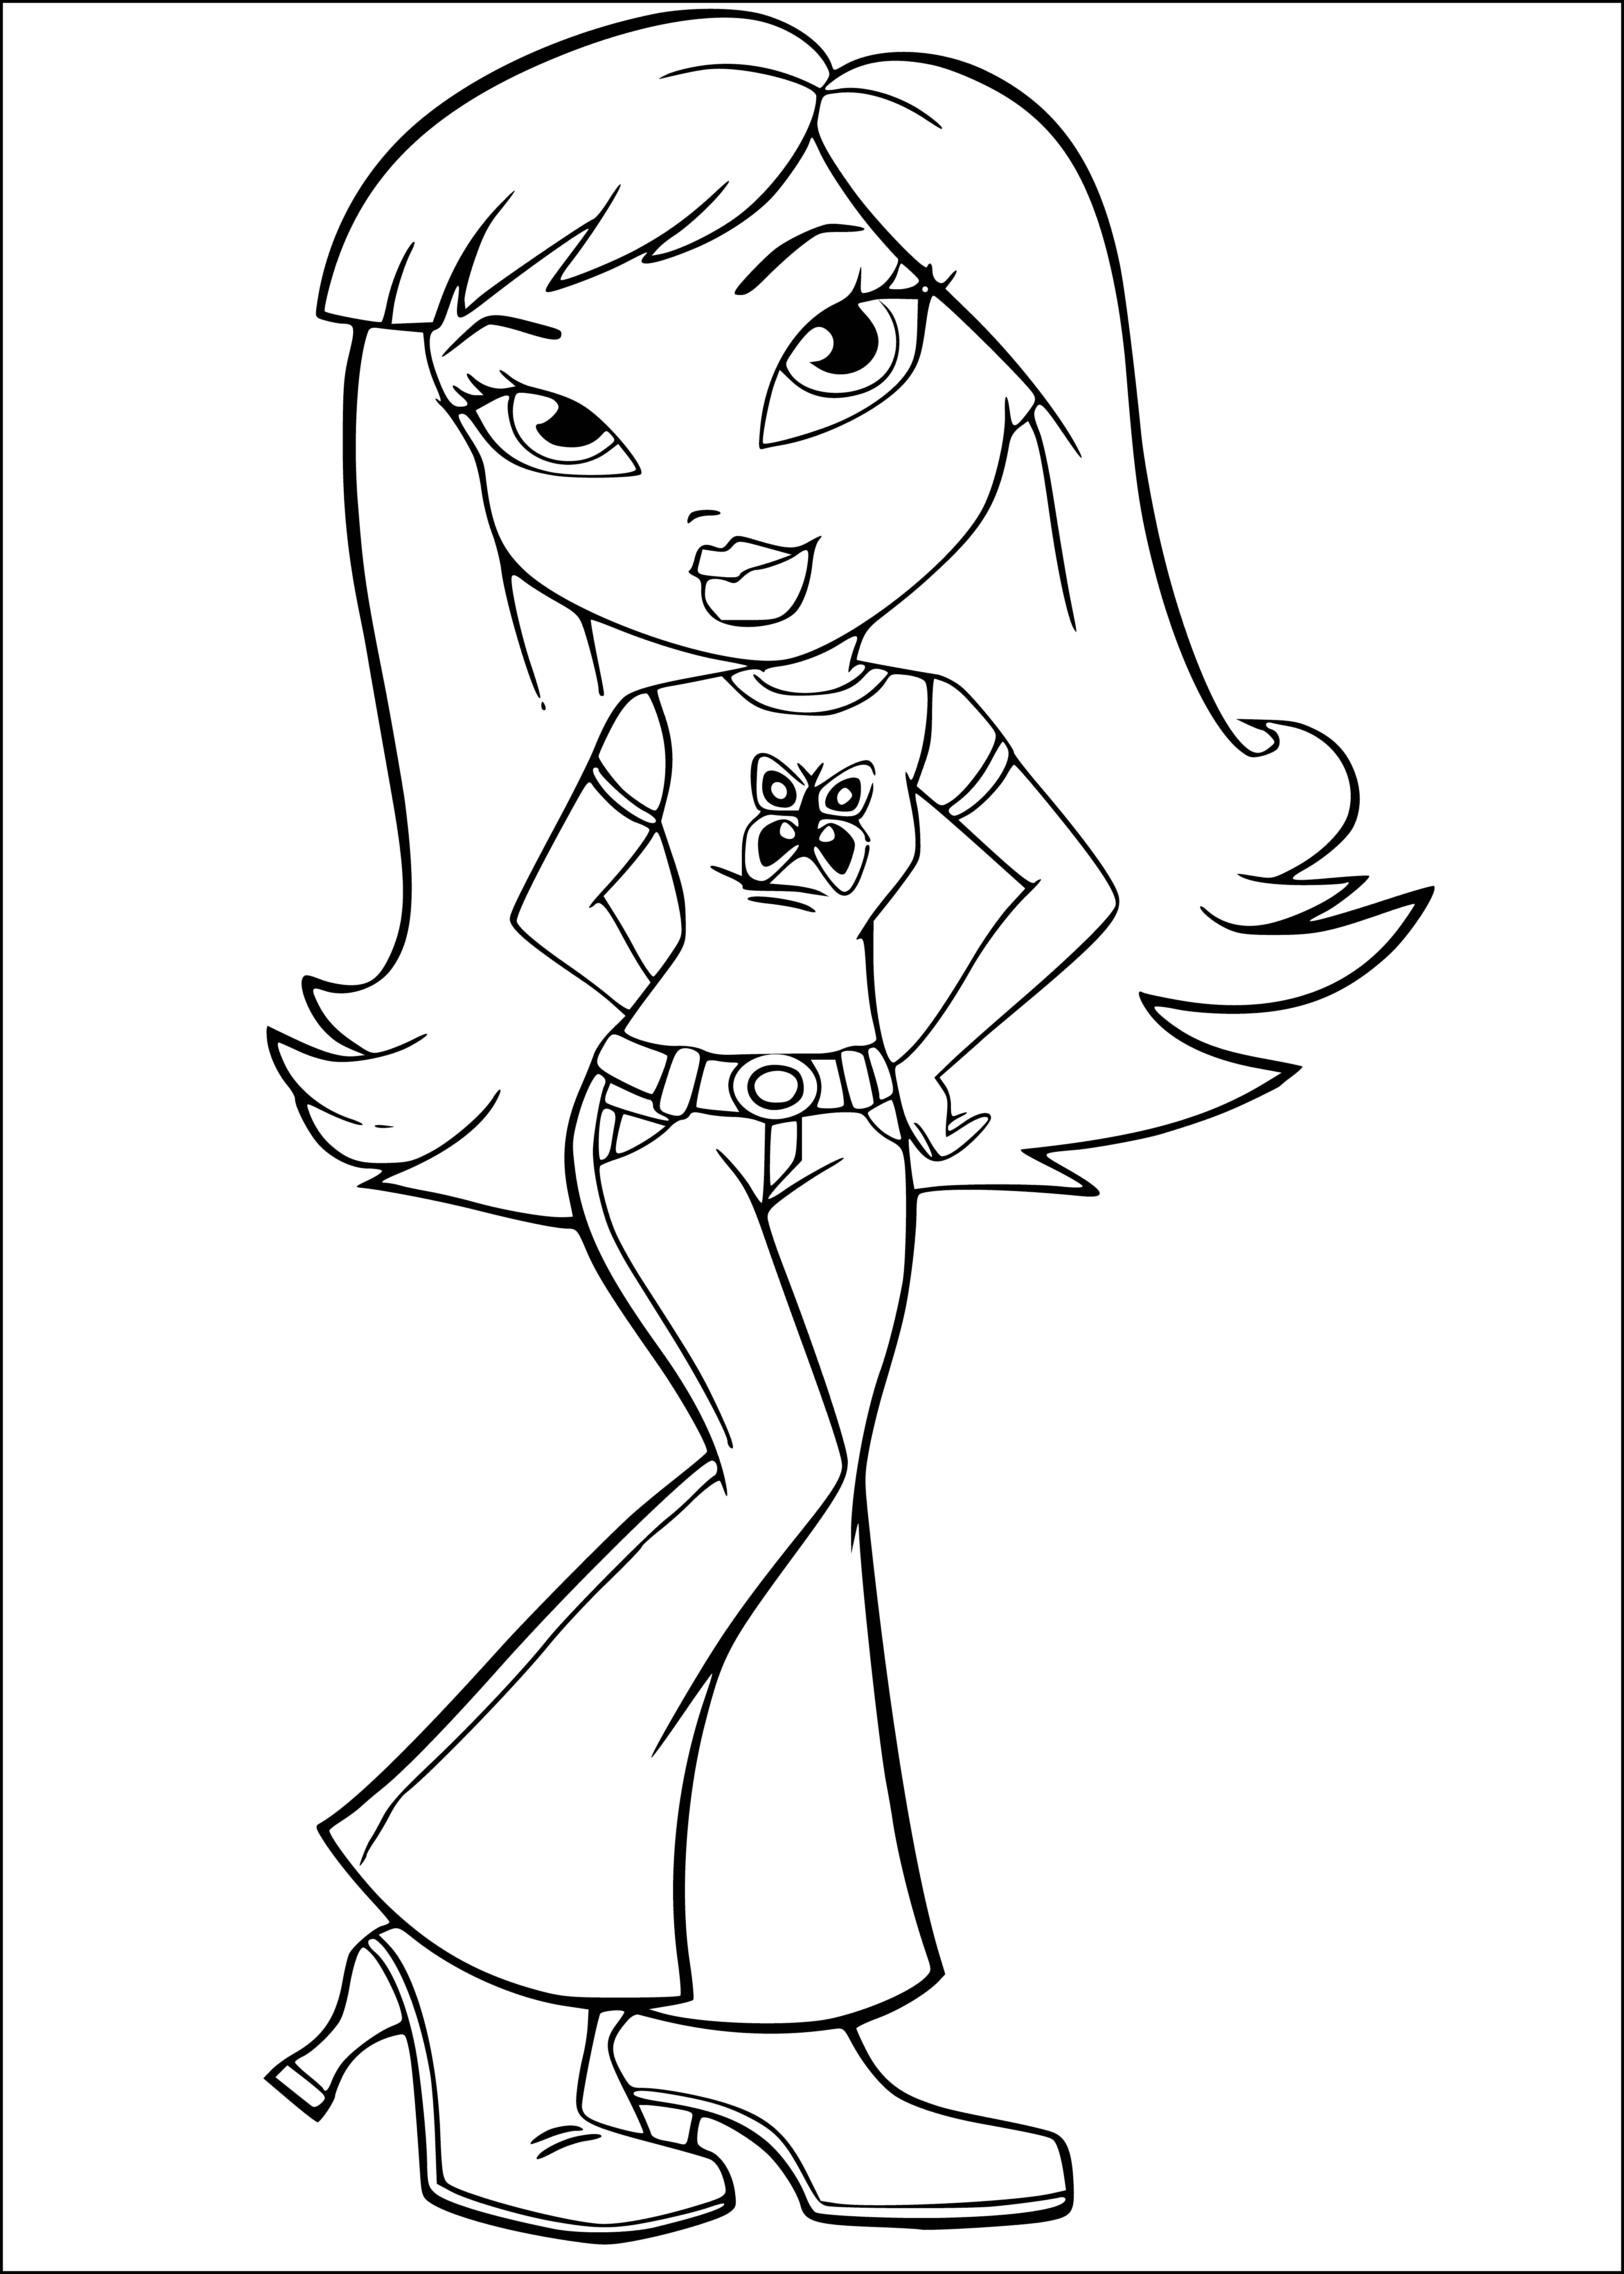 coloring page: Girl in short dress & high heels w/ wavy hair, purse & hearts drawn around her on checkered yellow bg. Smiling!